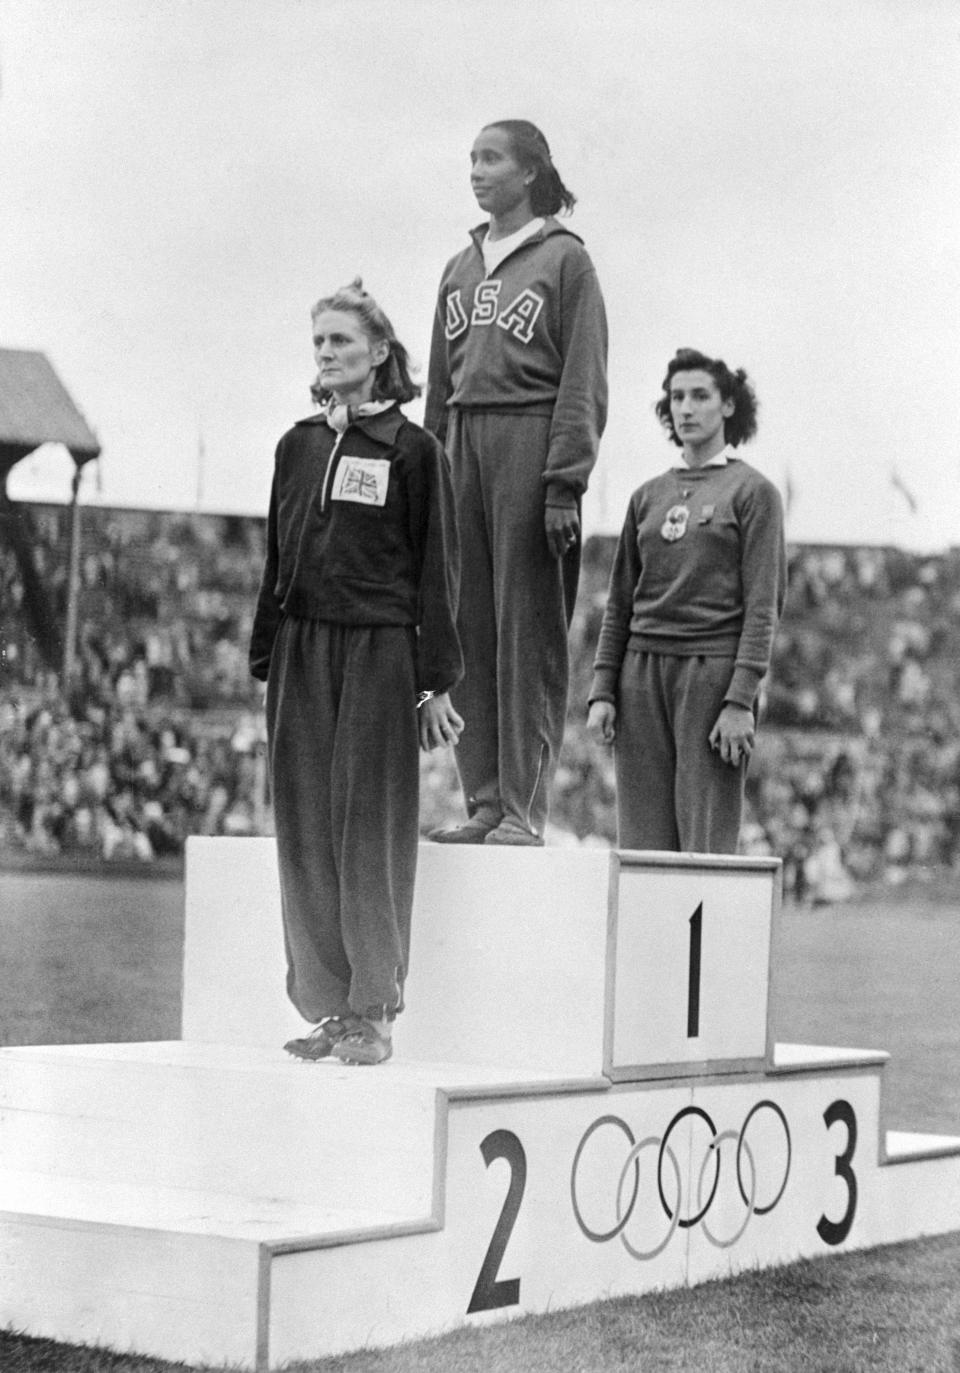 <p>1948 – ALICE COACHMAN – SPORTS – First African-American woman to win an Olympic gold medal. — Alice Coachman, (C) of the U.S. along with the winner D.J. Tyler, (L) of Great Britain, and M.O.M. Ostermeyer, of France, stand on a podium at Wembley Stadium in London, England, August 7, 1948, to receive their awards for the Olympic women’s high jump. (Bettmann/CORBIS) </p>